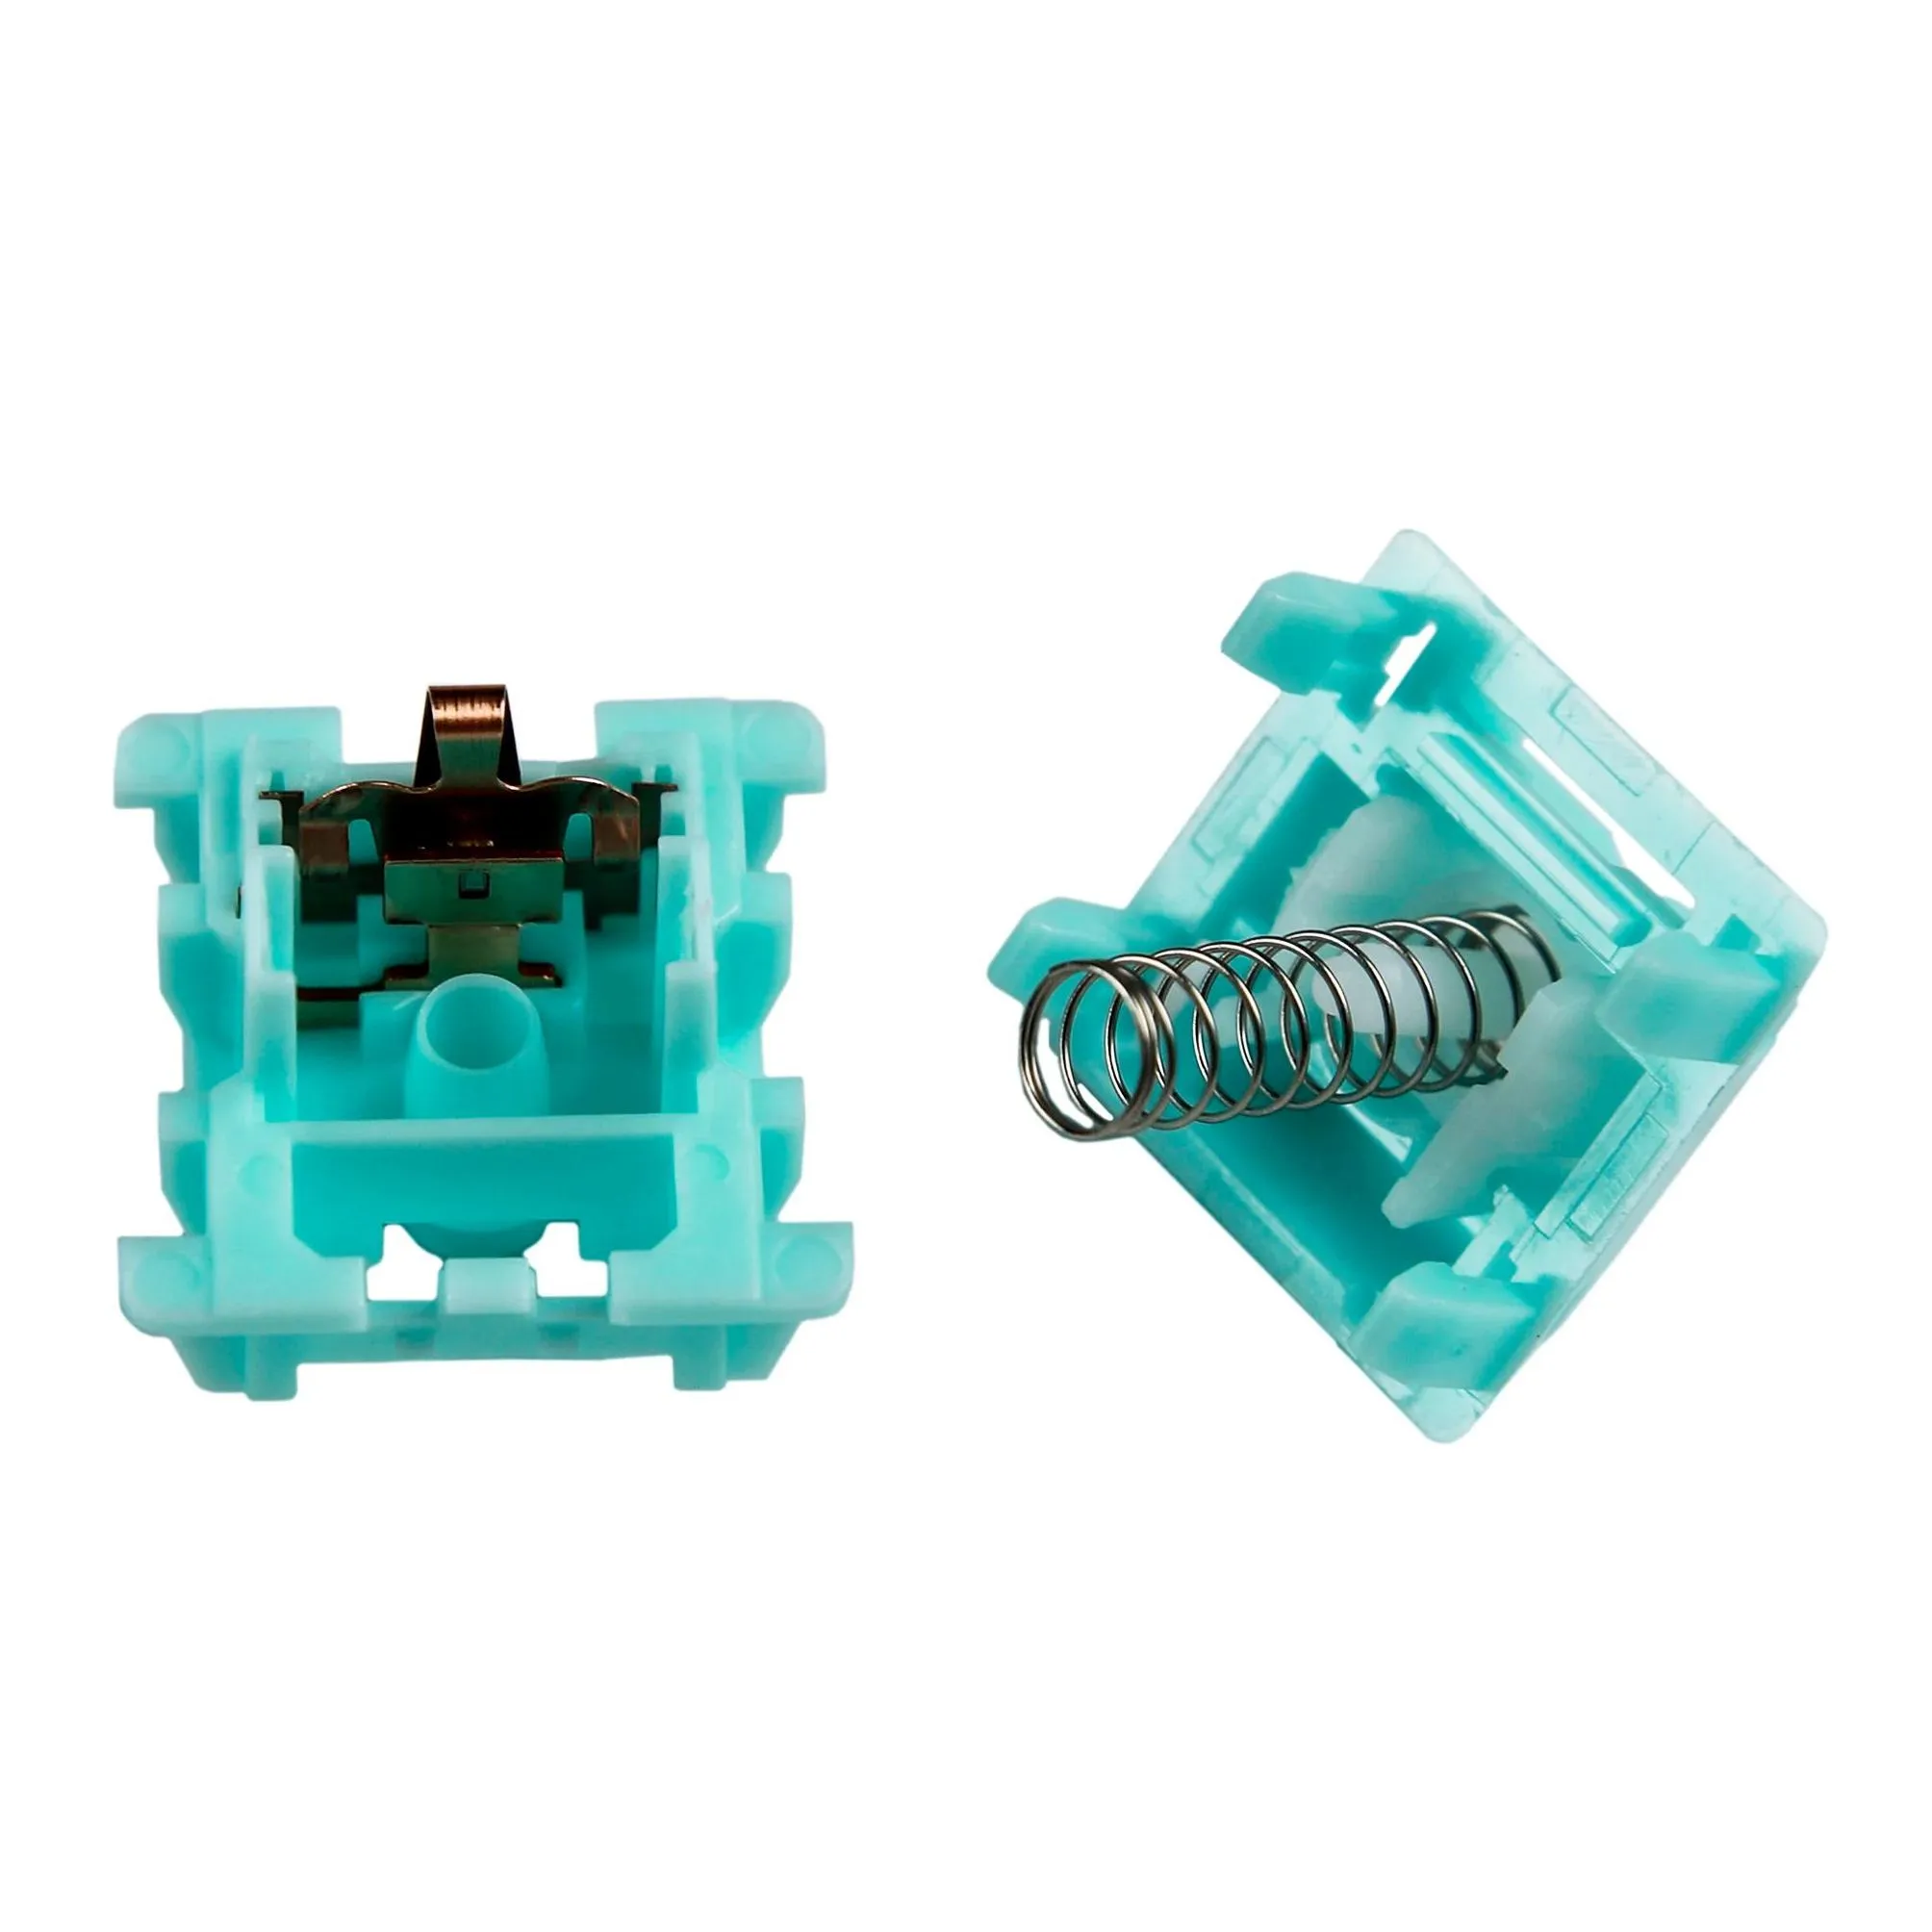 Pens 35 Pcs Dndkb Jingwei Switch 5 Pin Lubed Smd Rgb Mx Thocky Switches for Mechanical Keyboard Similar to Lynx Switches